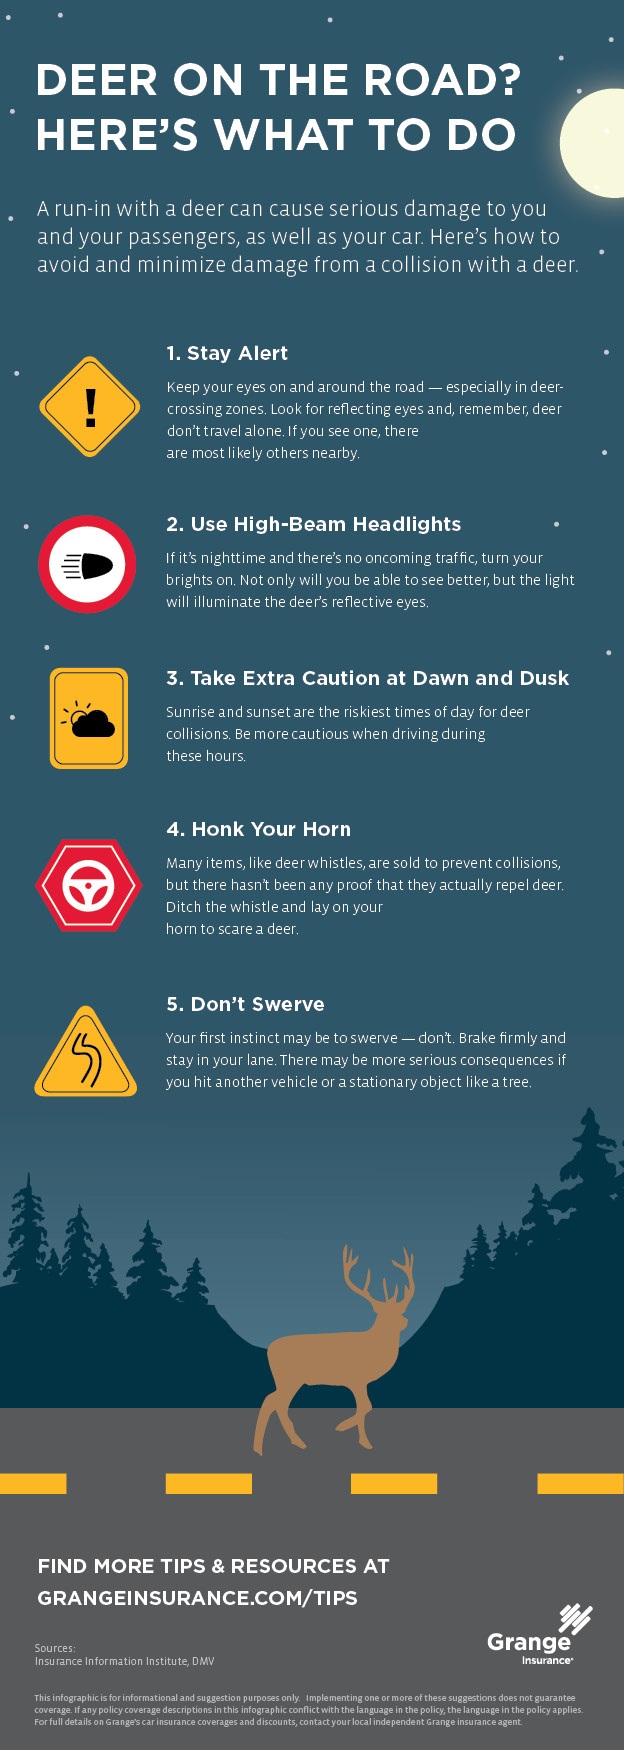 Deer on the road? Here's what to do | Tips & Resources | Grange Insurance